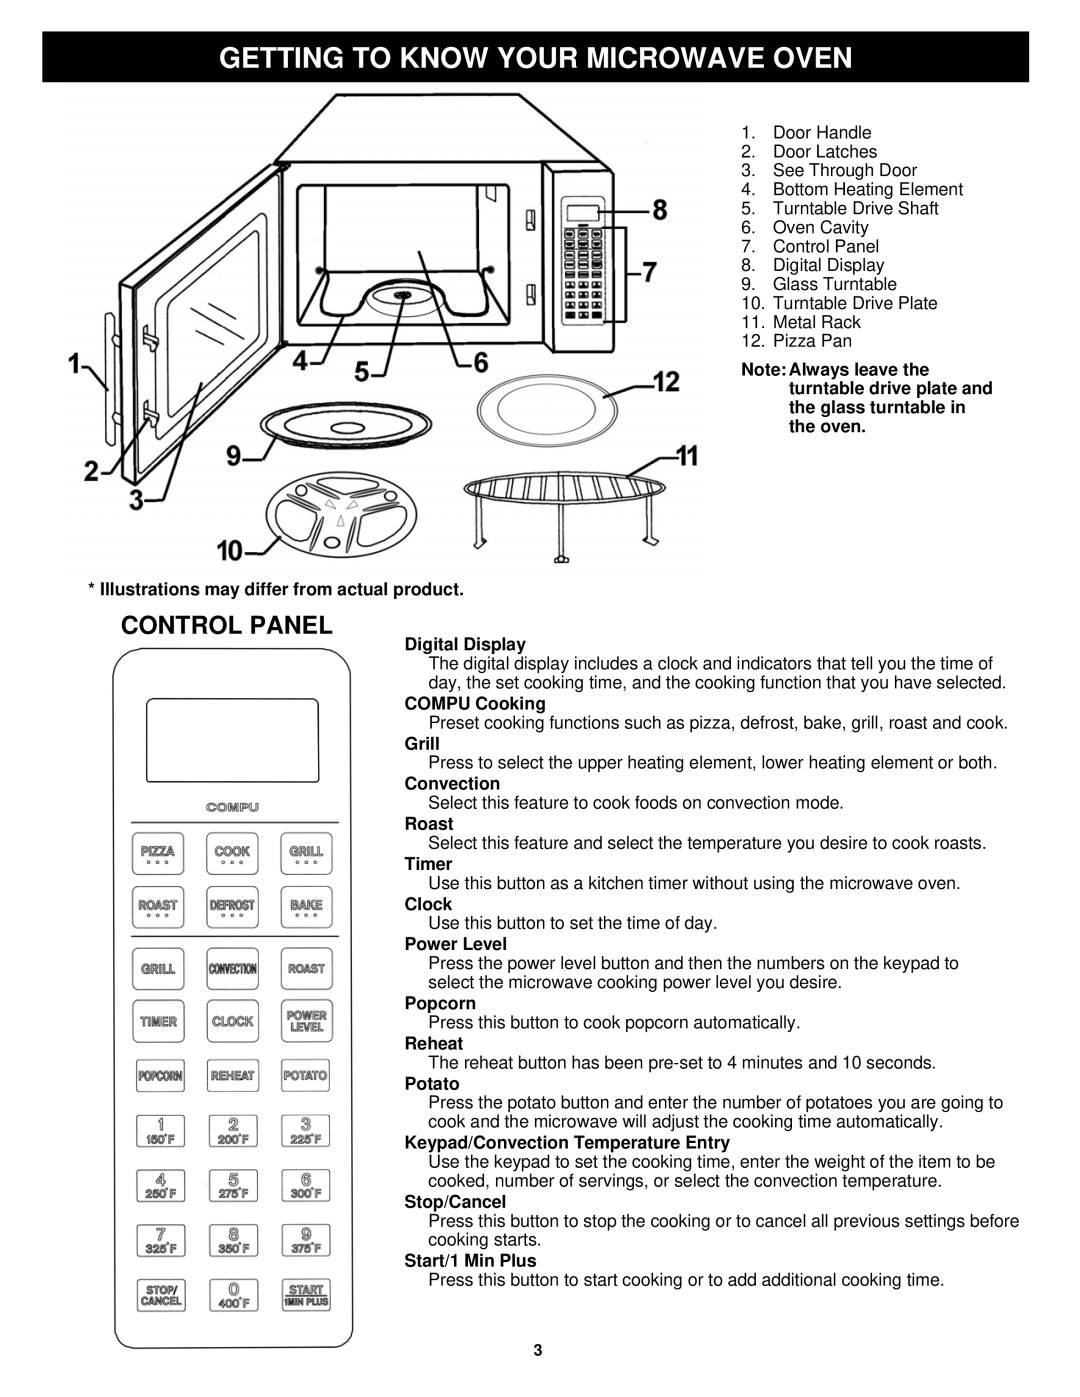 Euro-Pro K5345B owner manual Getting To Know Your Microwave Oven, Control Panel 